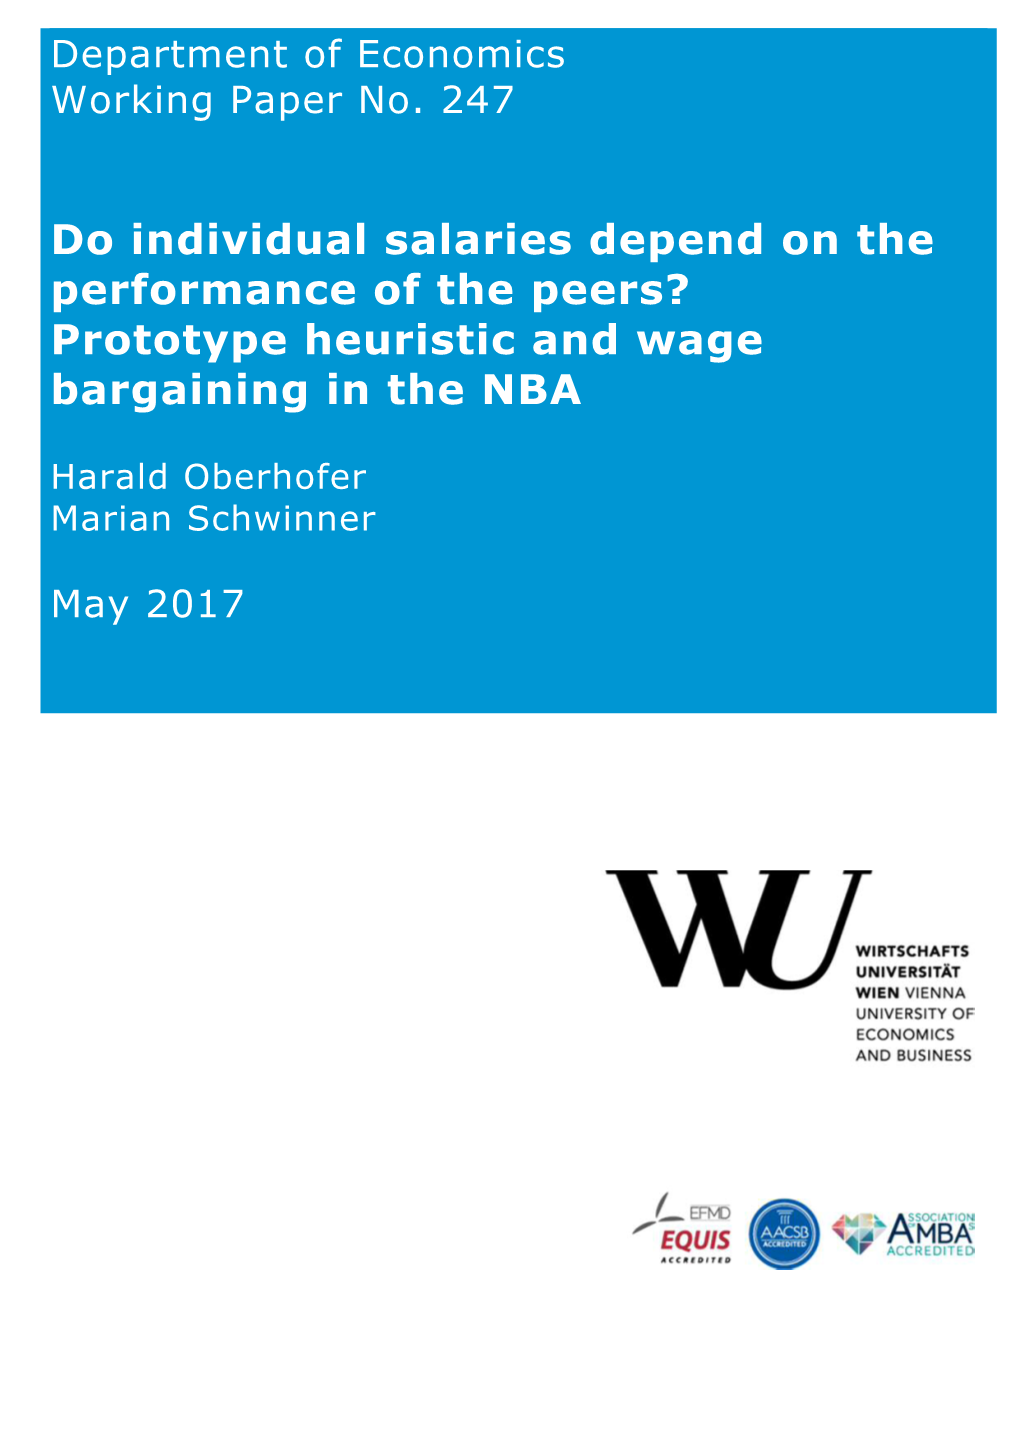 Prototype Heuristic and Wage Bargaining in the NBA